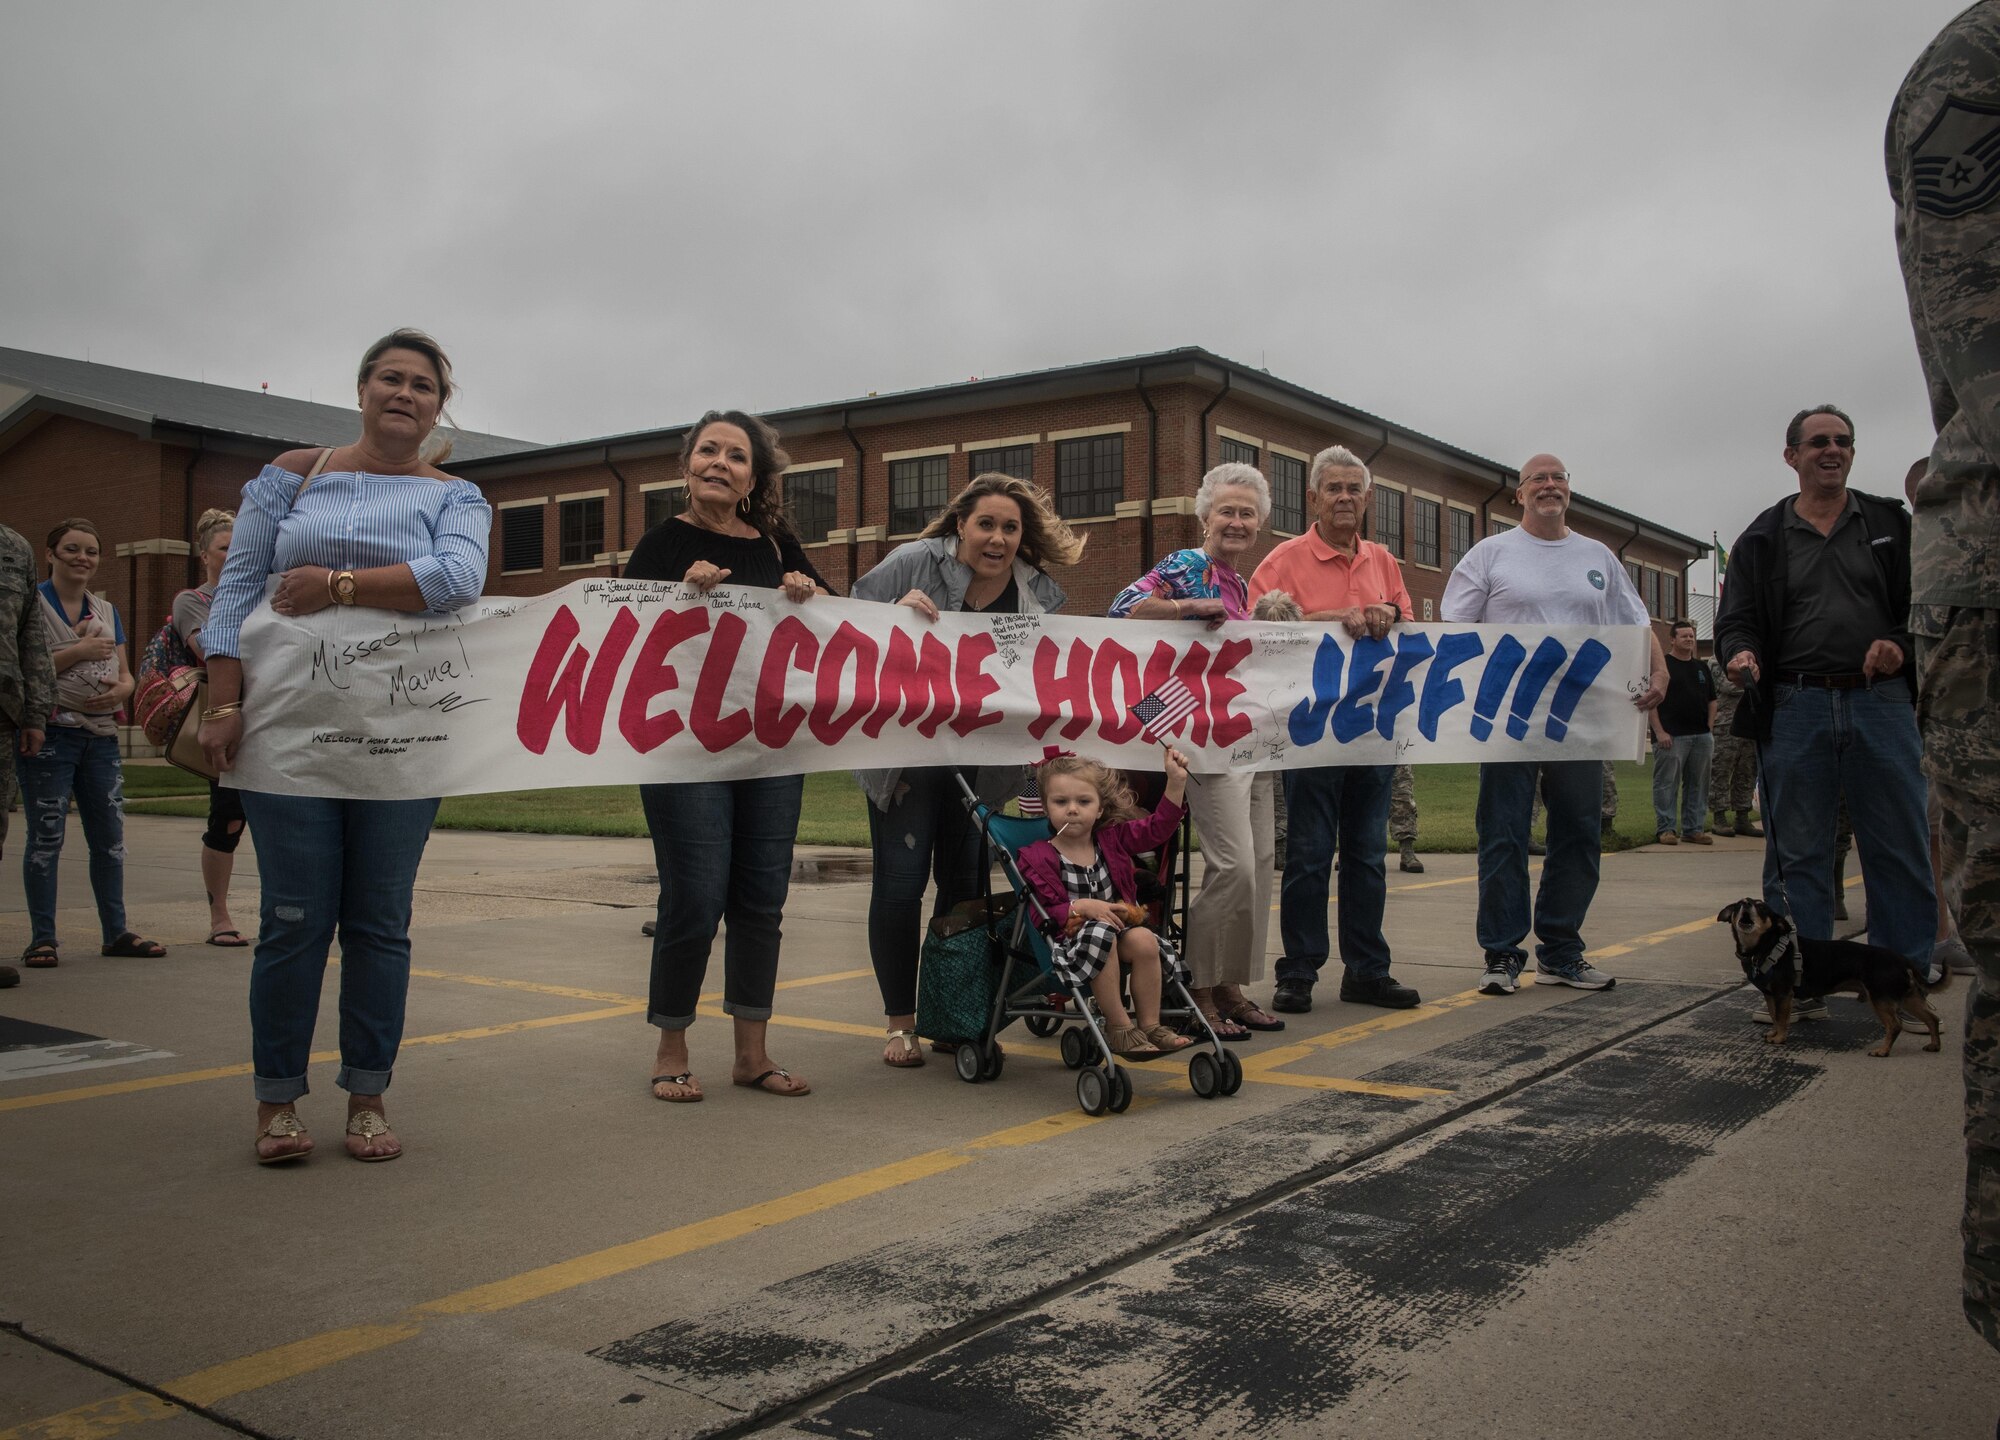 Family of Virginia Air National Guard Staff Sgt. Jeff Greenquist, holds a welcome home sign, celebrating his return from the Middle East at Joint Base Langley- Eustis, Va., Oct. 12, 2017. Greenquist is a low observable technician from the 192nd Maintenance Squadron and was deployed with the 1st Fighter Wing for six months. The deployment consisted of F-22 Raptors and Airmen representing the 1st FW in Operation Inherent Resolve against ISIS. (U.S. Air Force photo by Staff Sgt. Carlin Leslie)